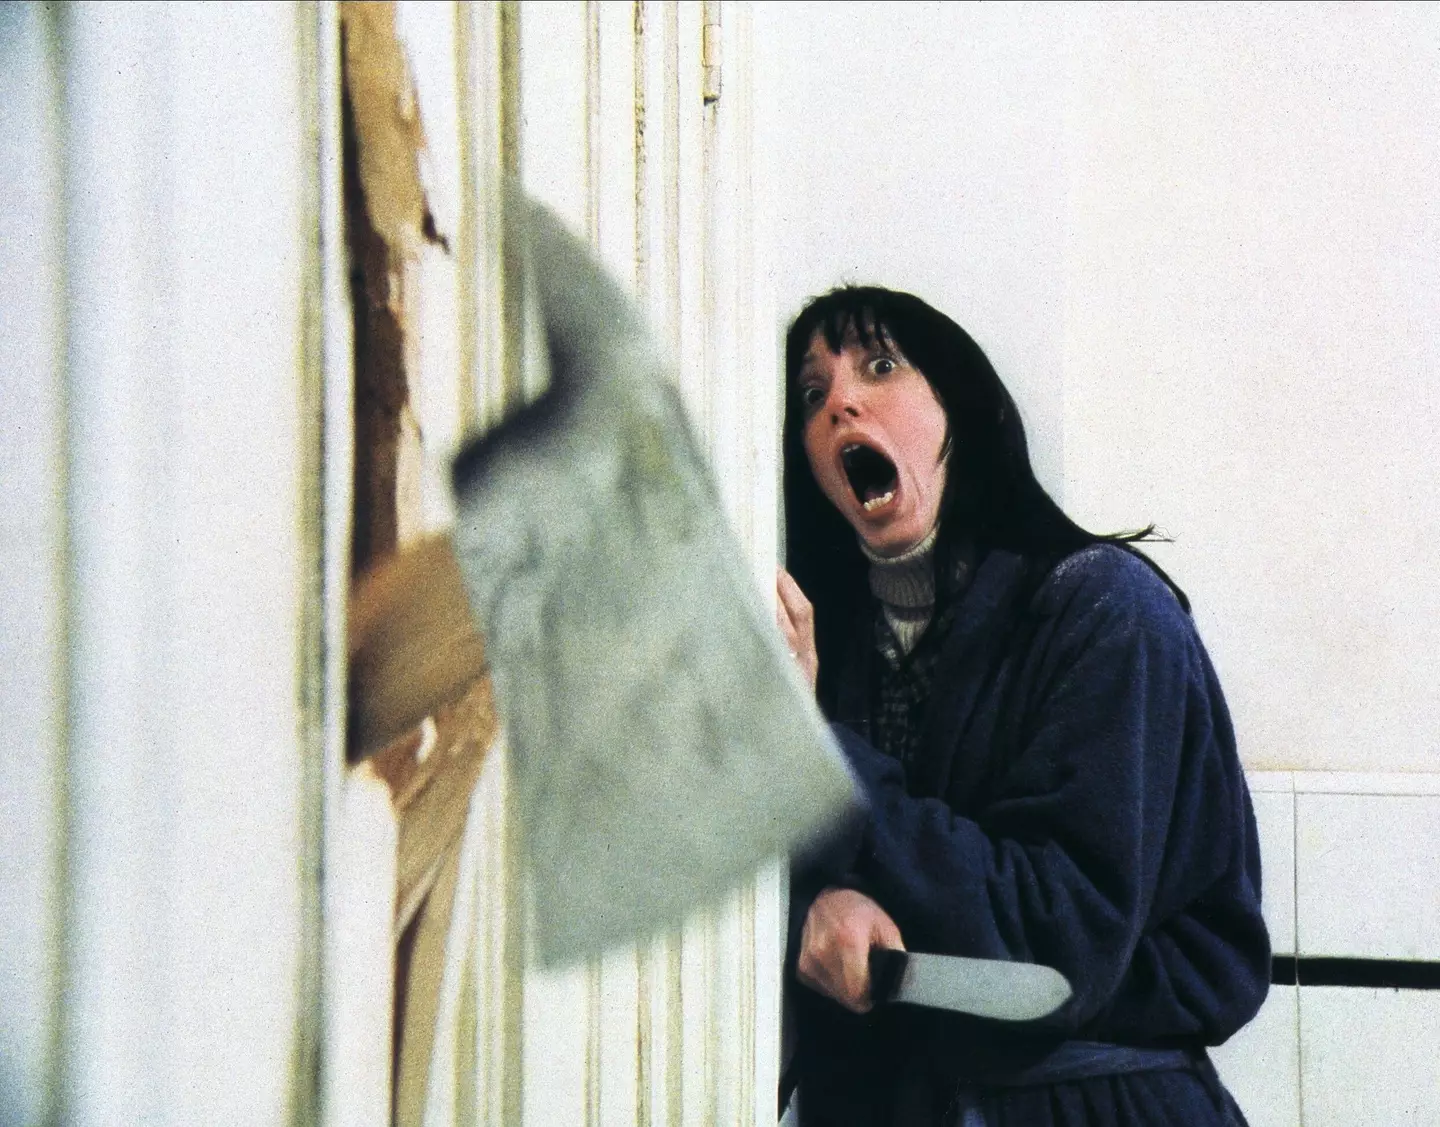 Shelley Duvall starred in The Shining.